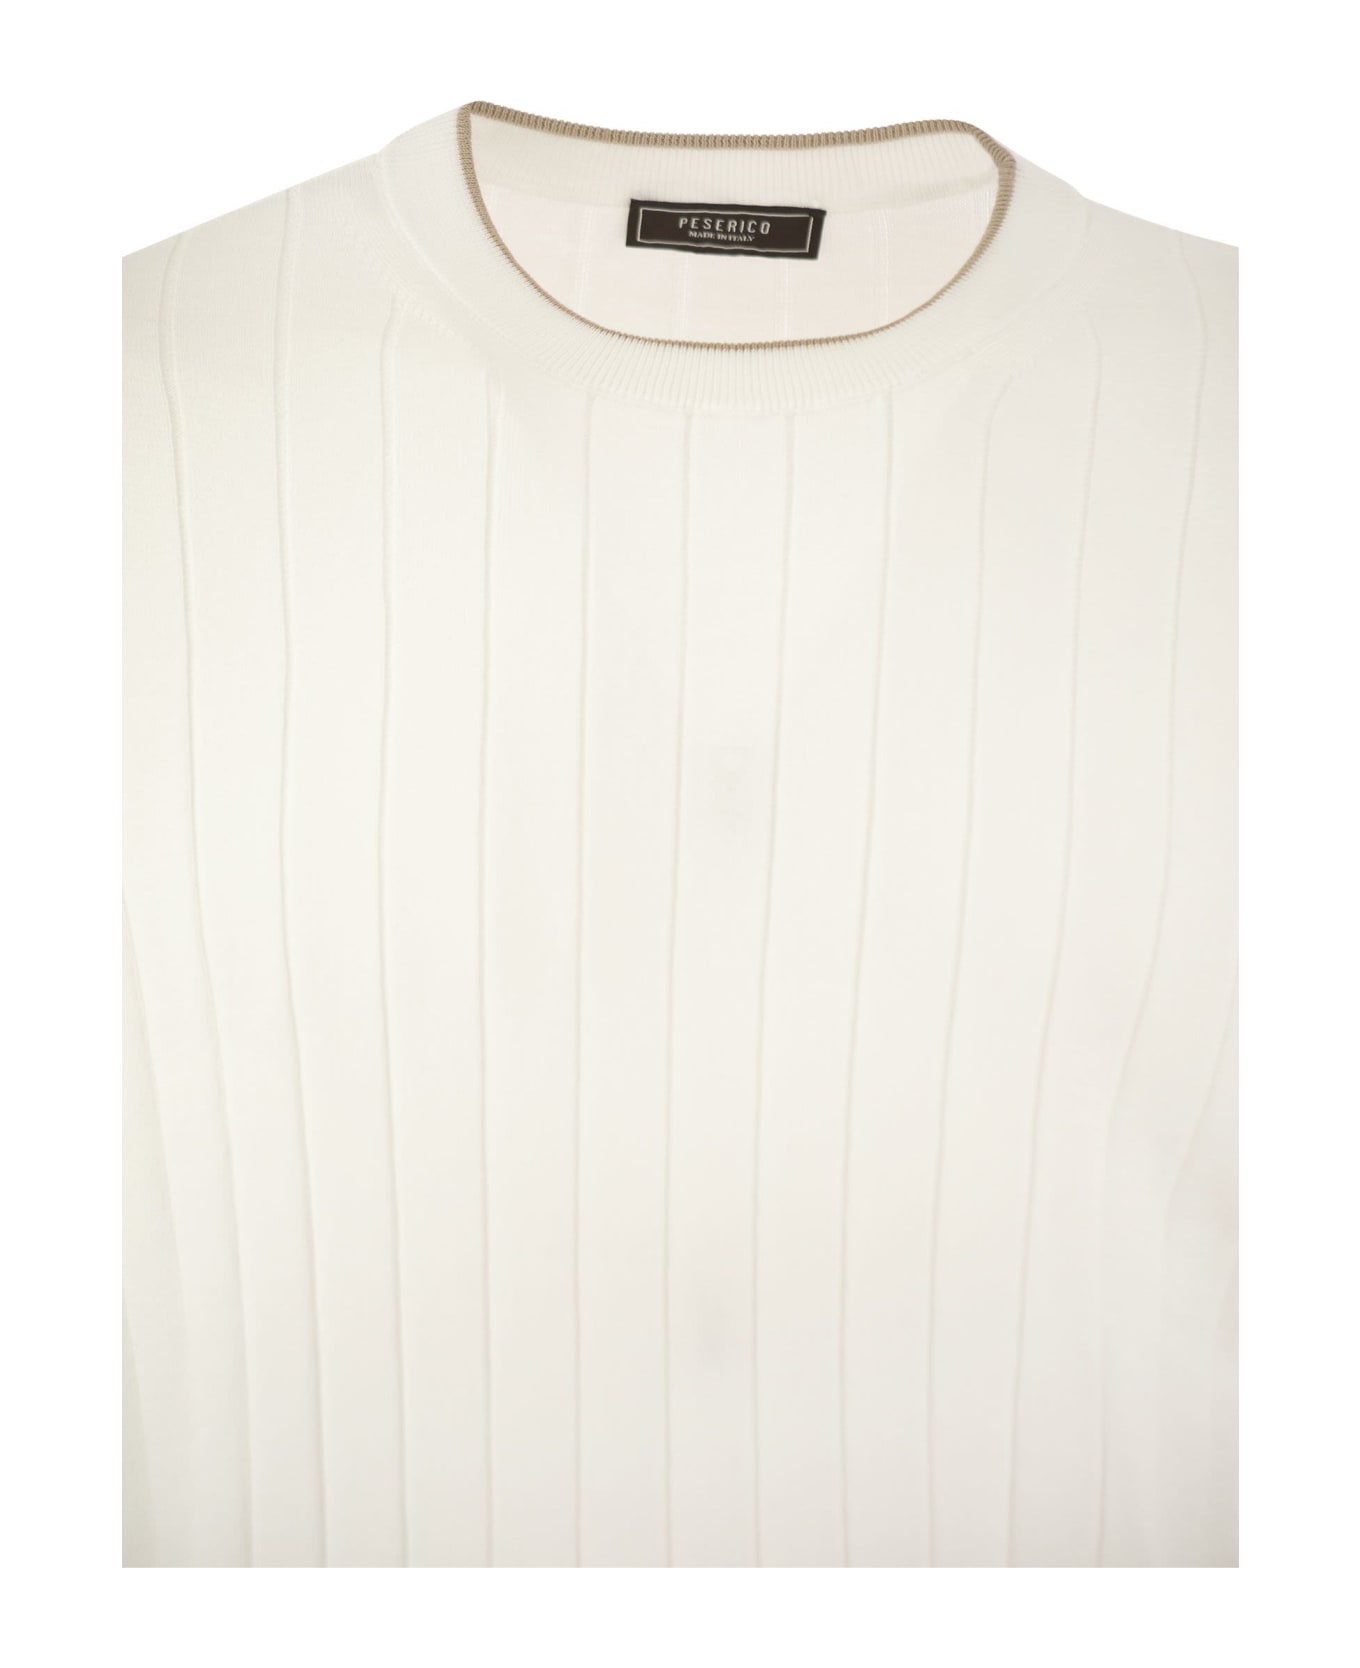 Peserico T-shirt In Pure Cotton Crépe Yarn - White/beige